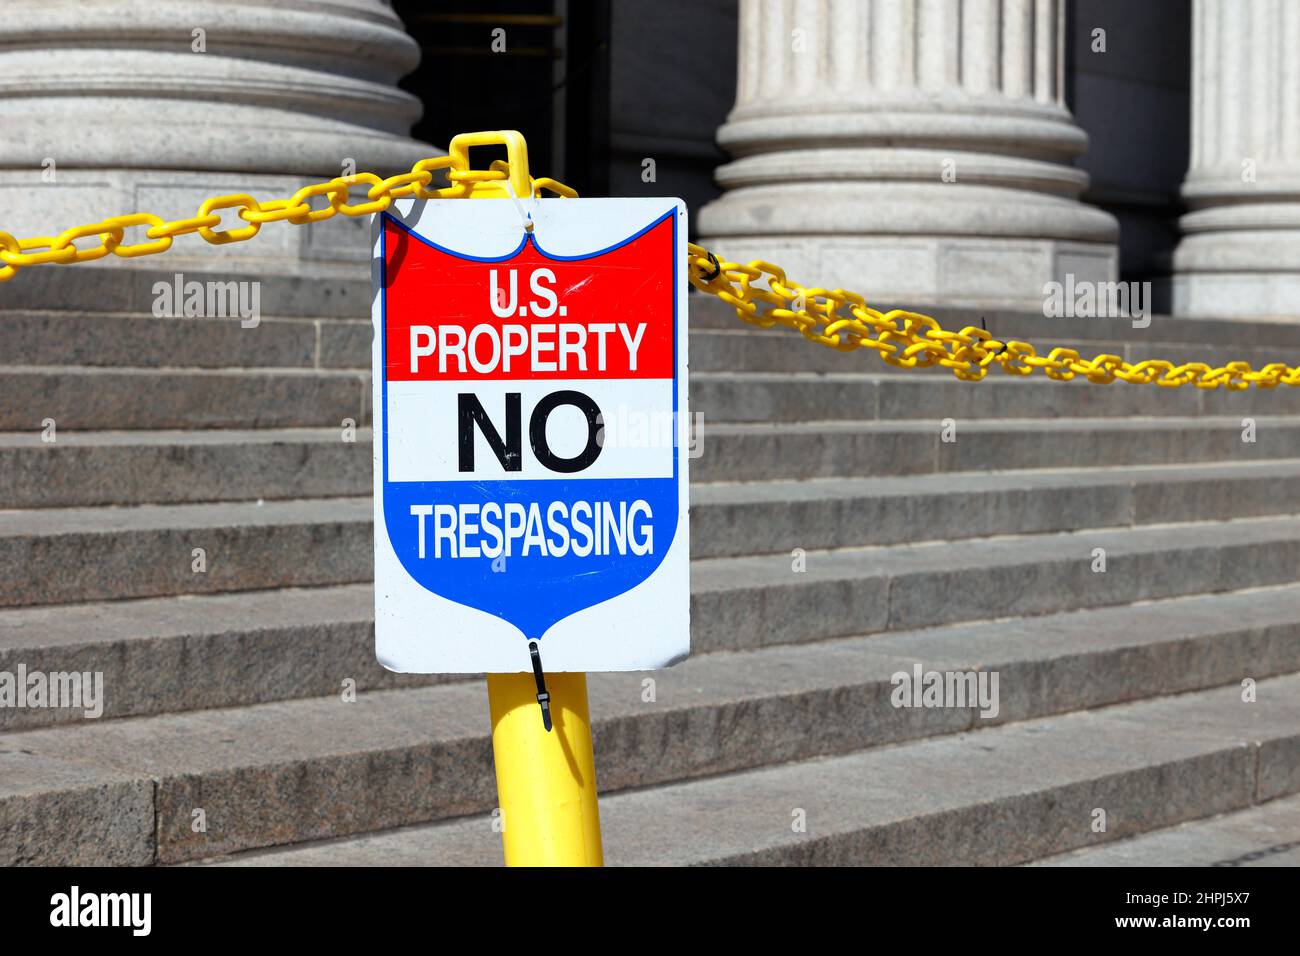 A sign reads 'US Property No Trespassing' on the steps of a building. Stock Photo